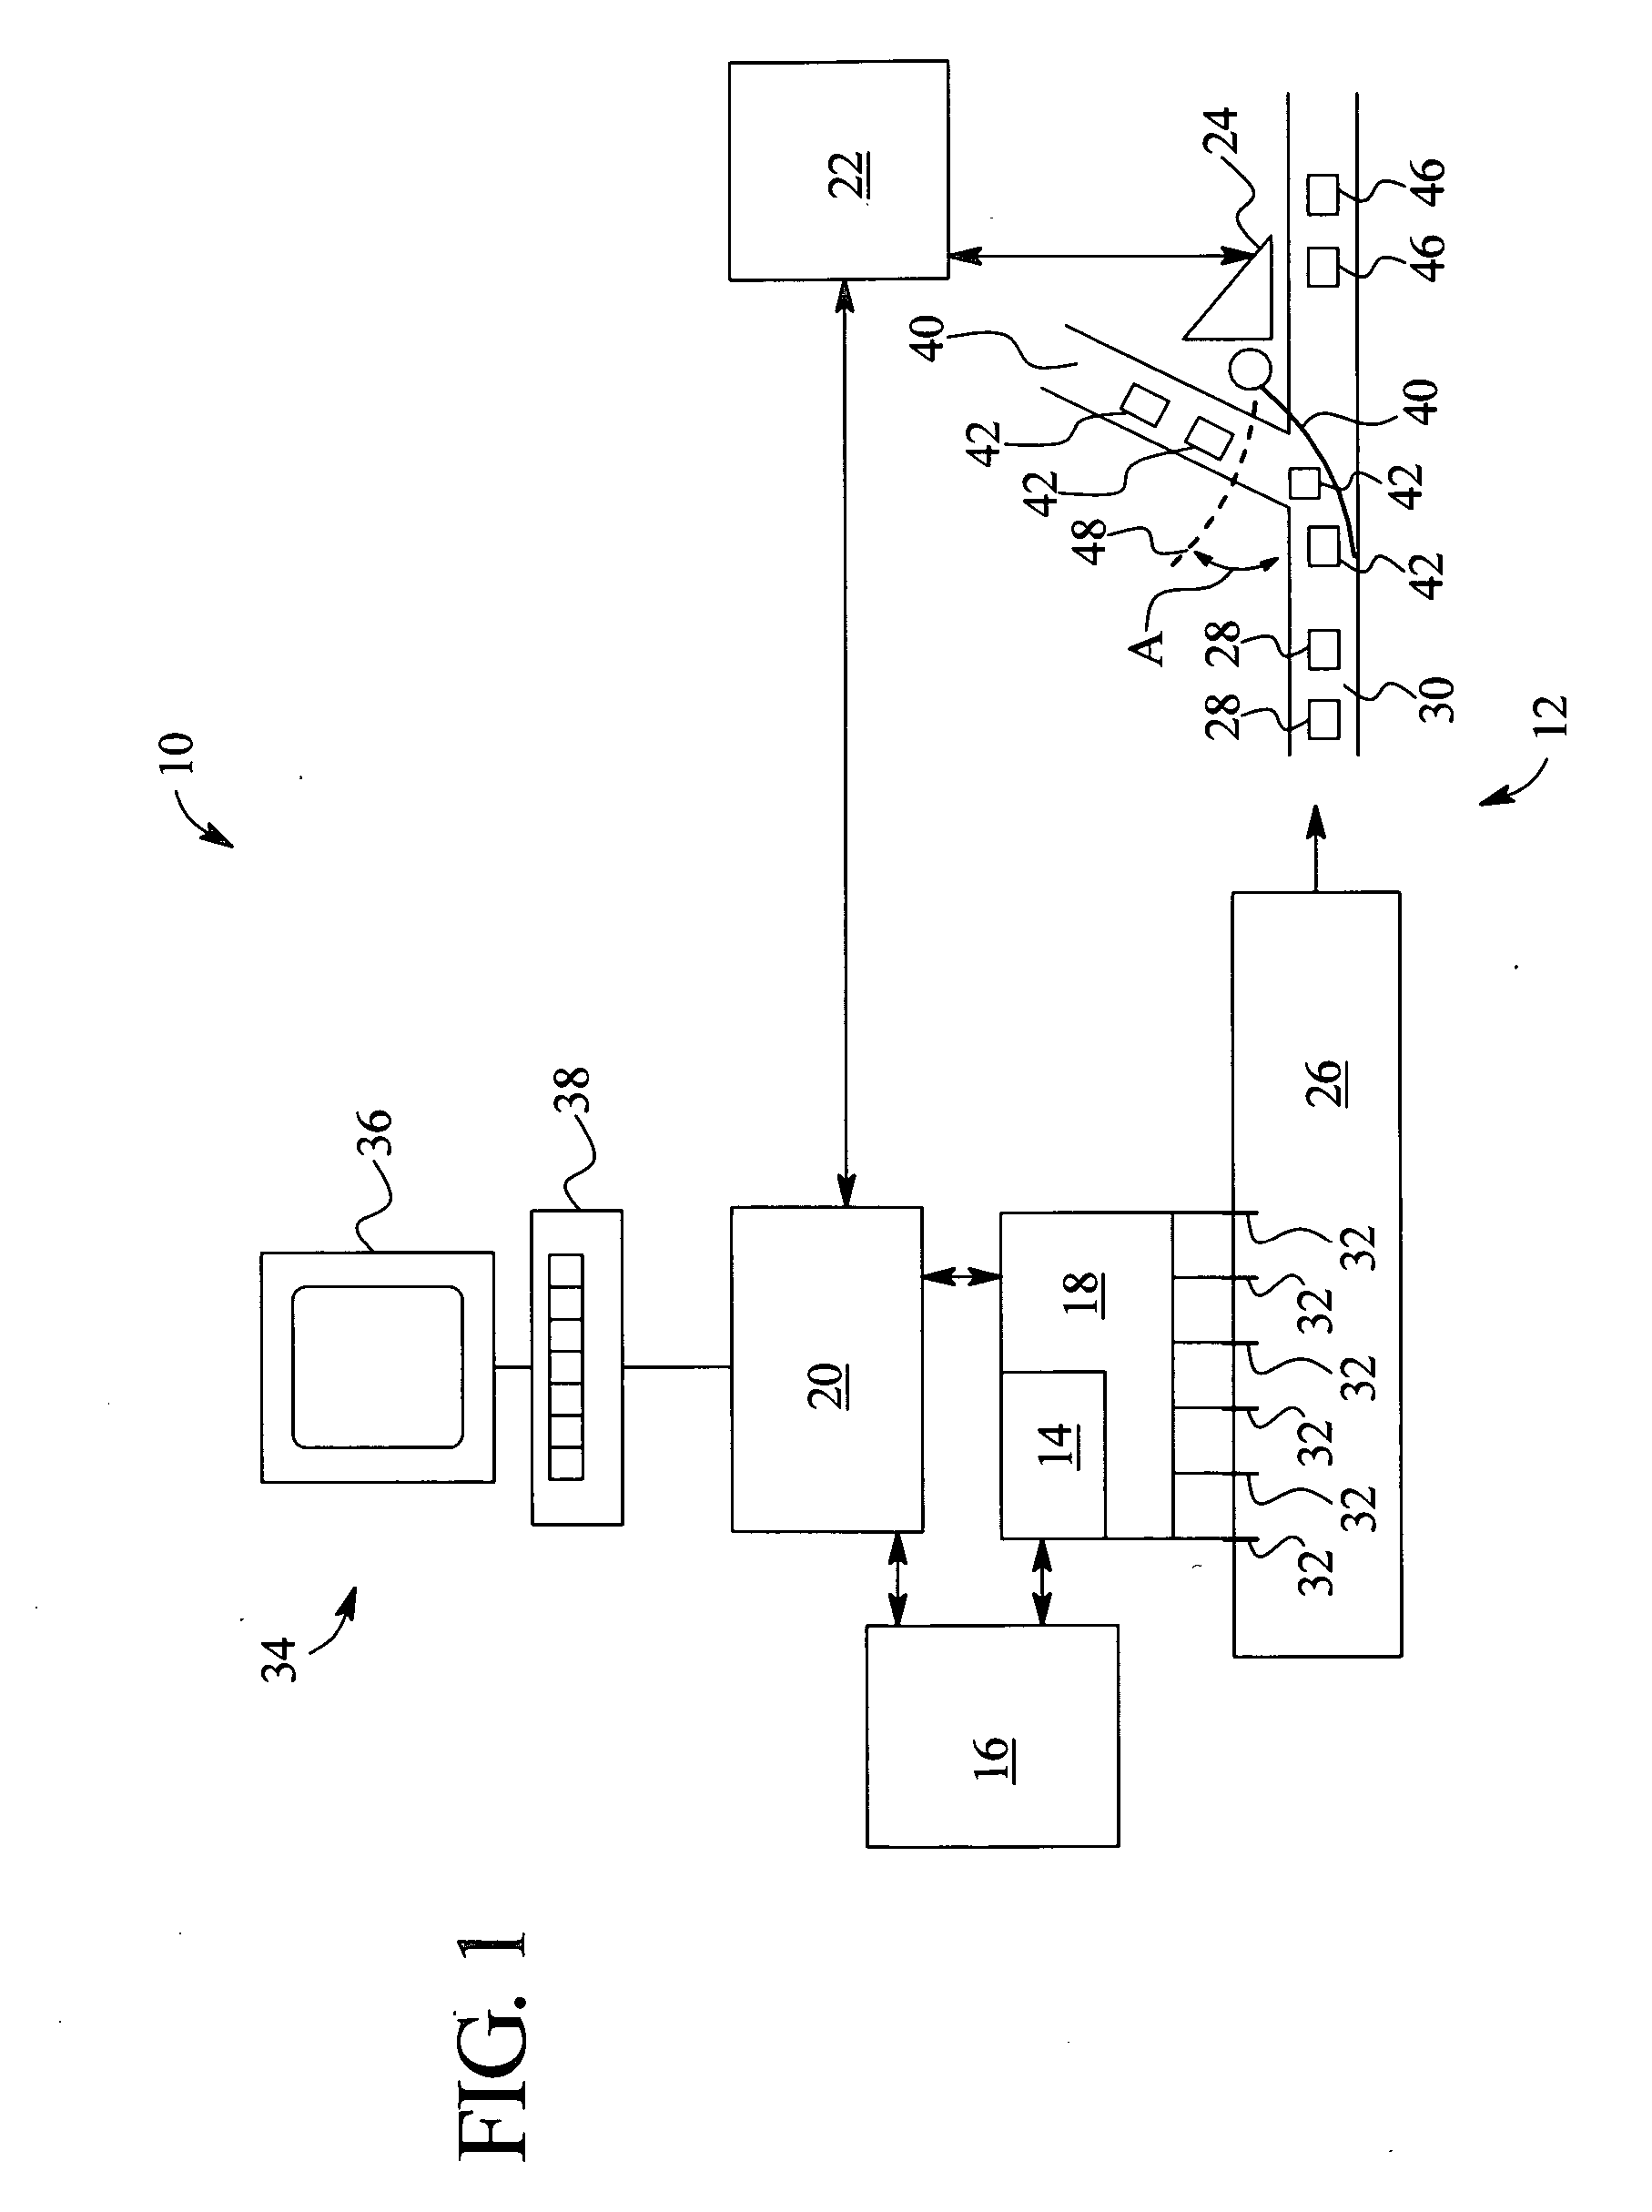 Parametric injection molding system and method